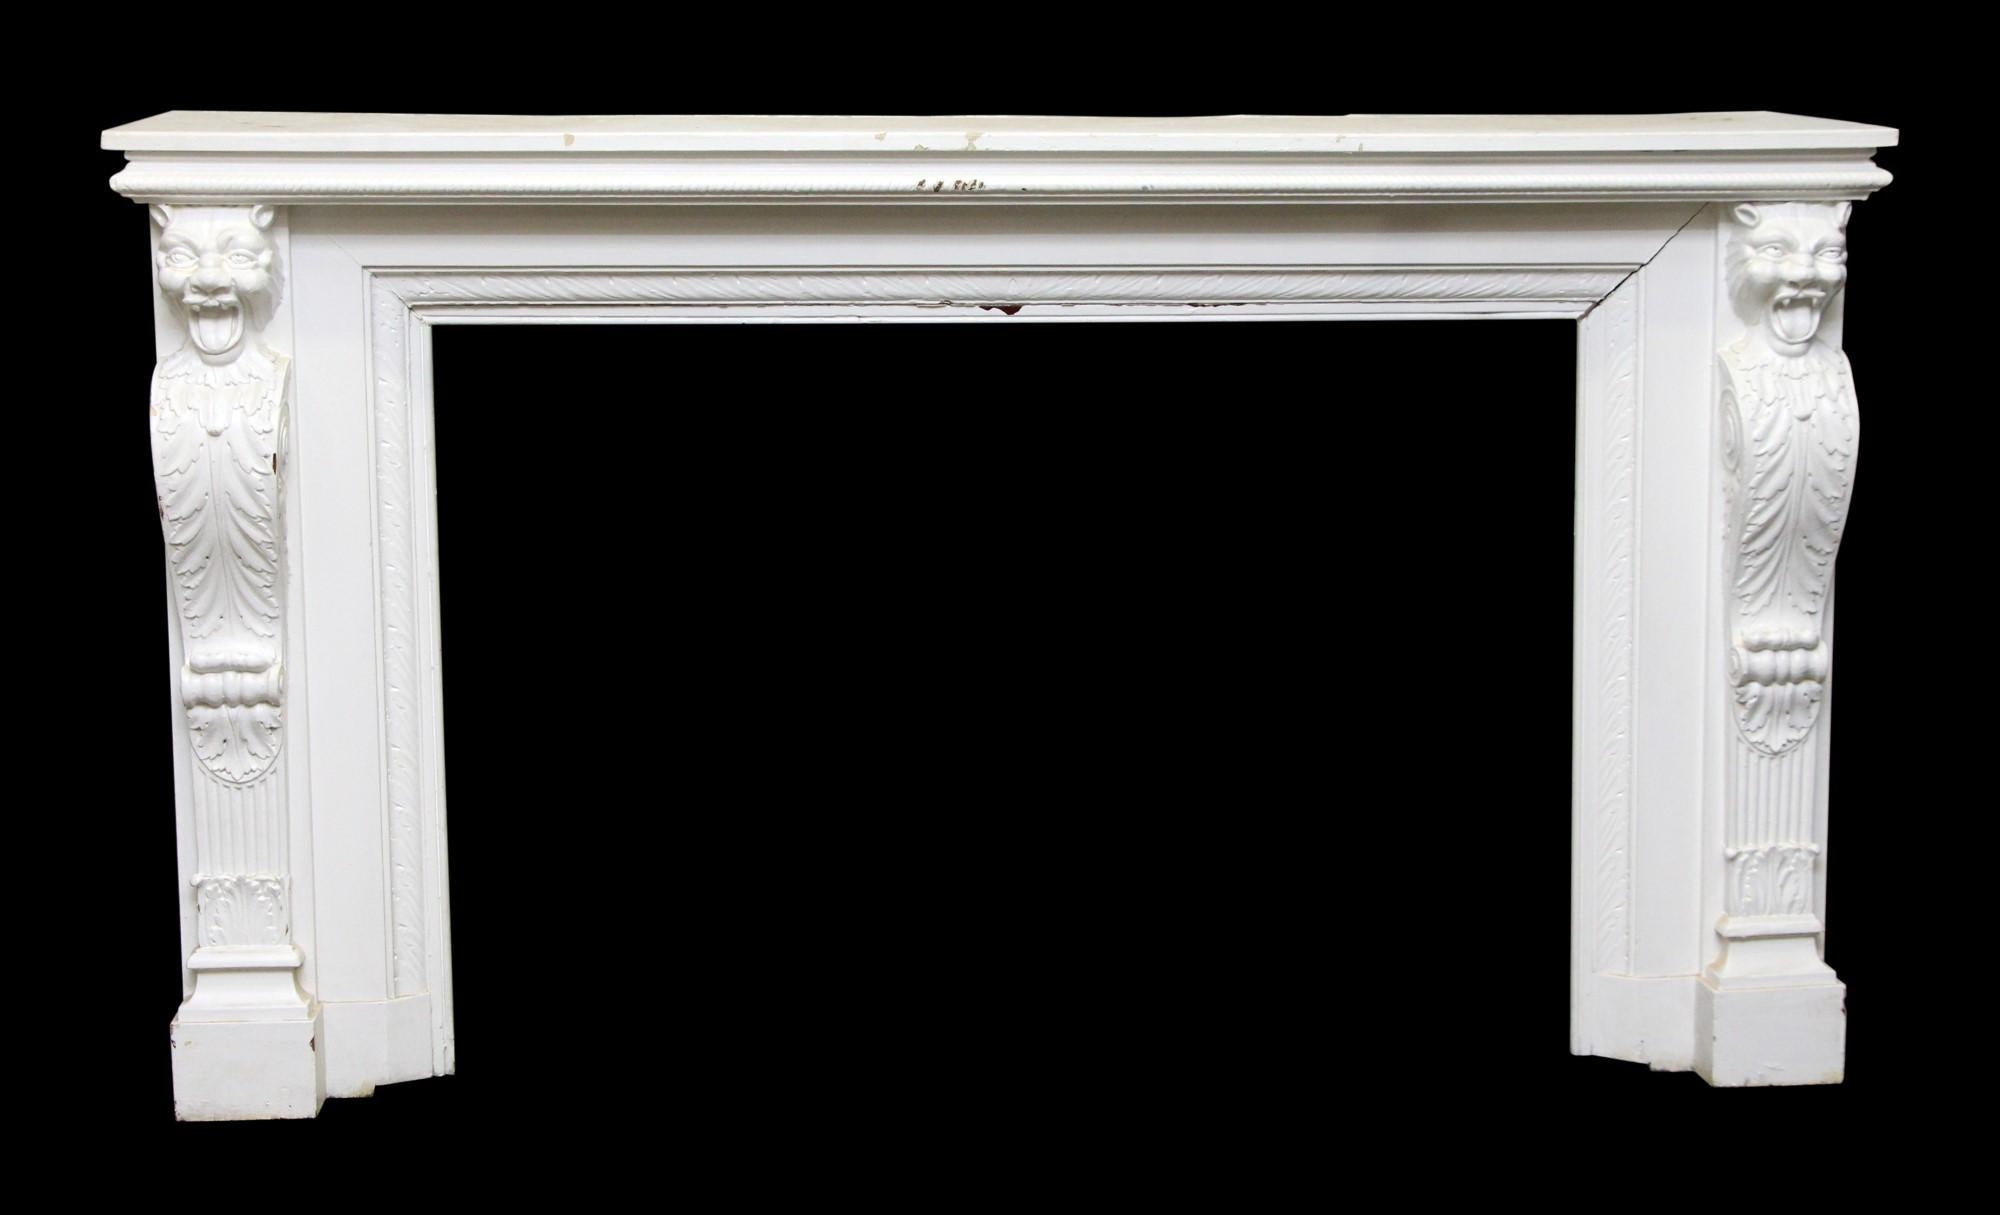 Antique hand carved white wood mantel with griffin on sides. This figural mantel is from the former Gloria Vanderbilt estate located at 39 E. 72nd St, Manhattan, NYC. It is in its original state with no alterations. This can be seen at our 400